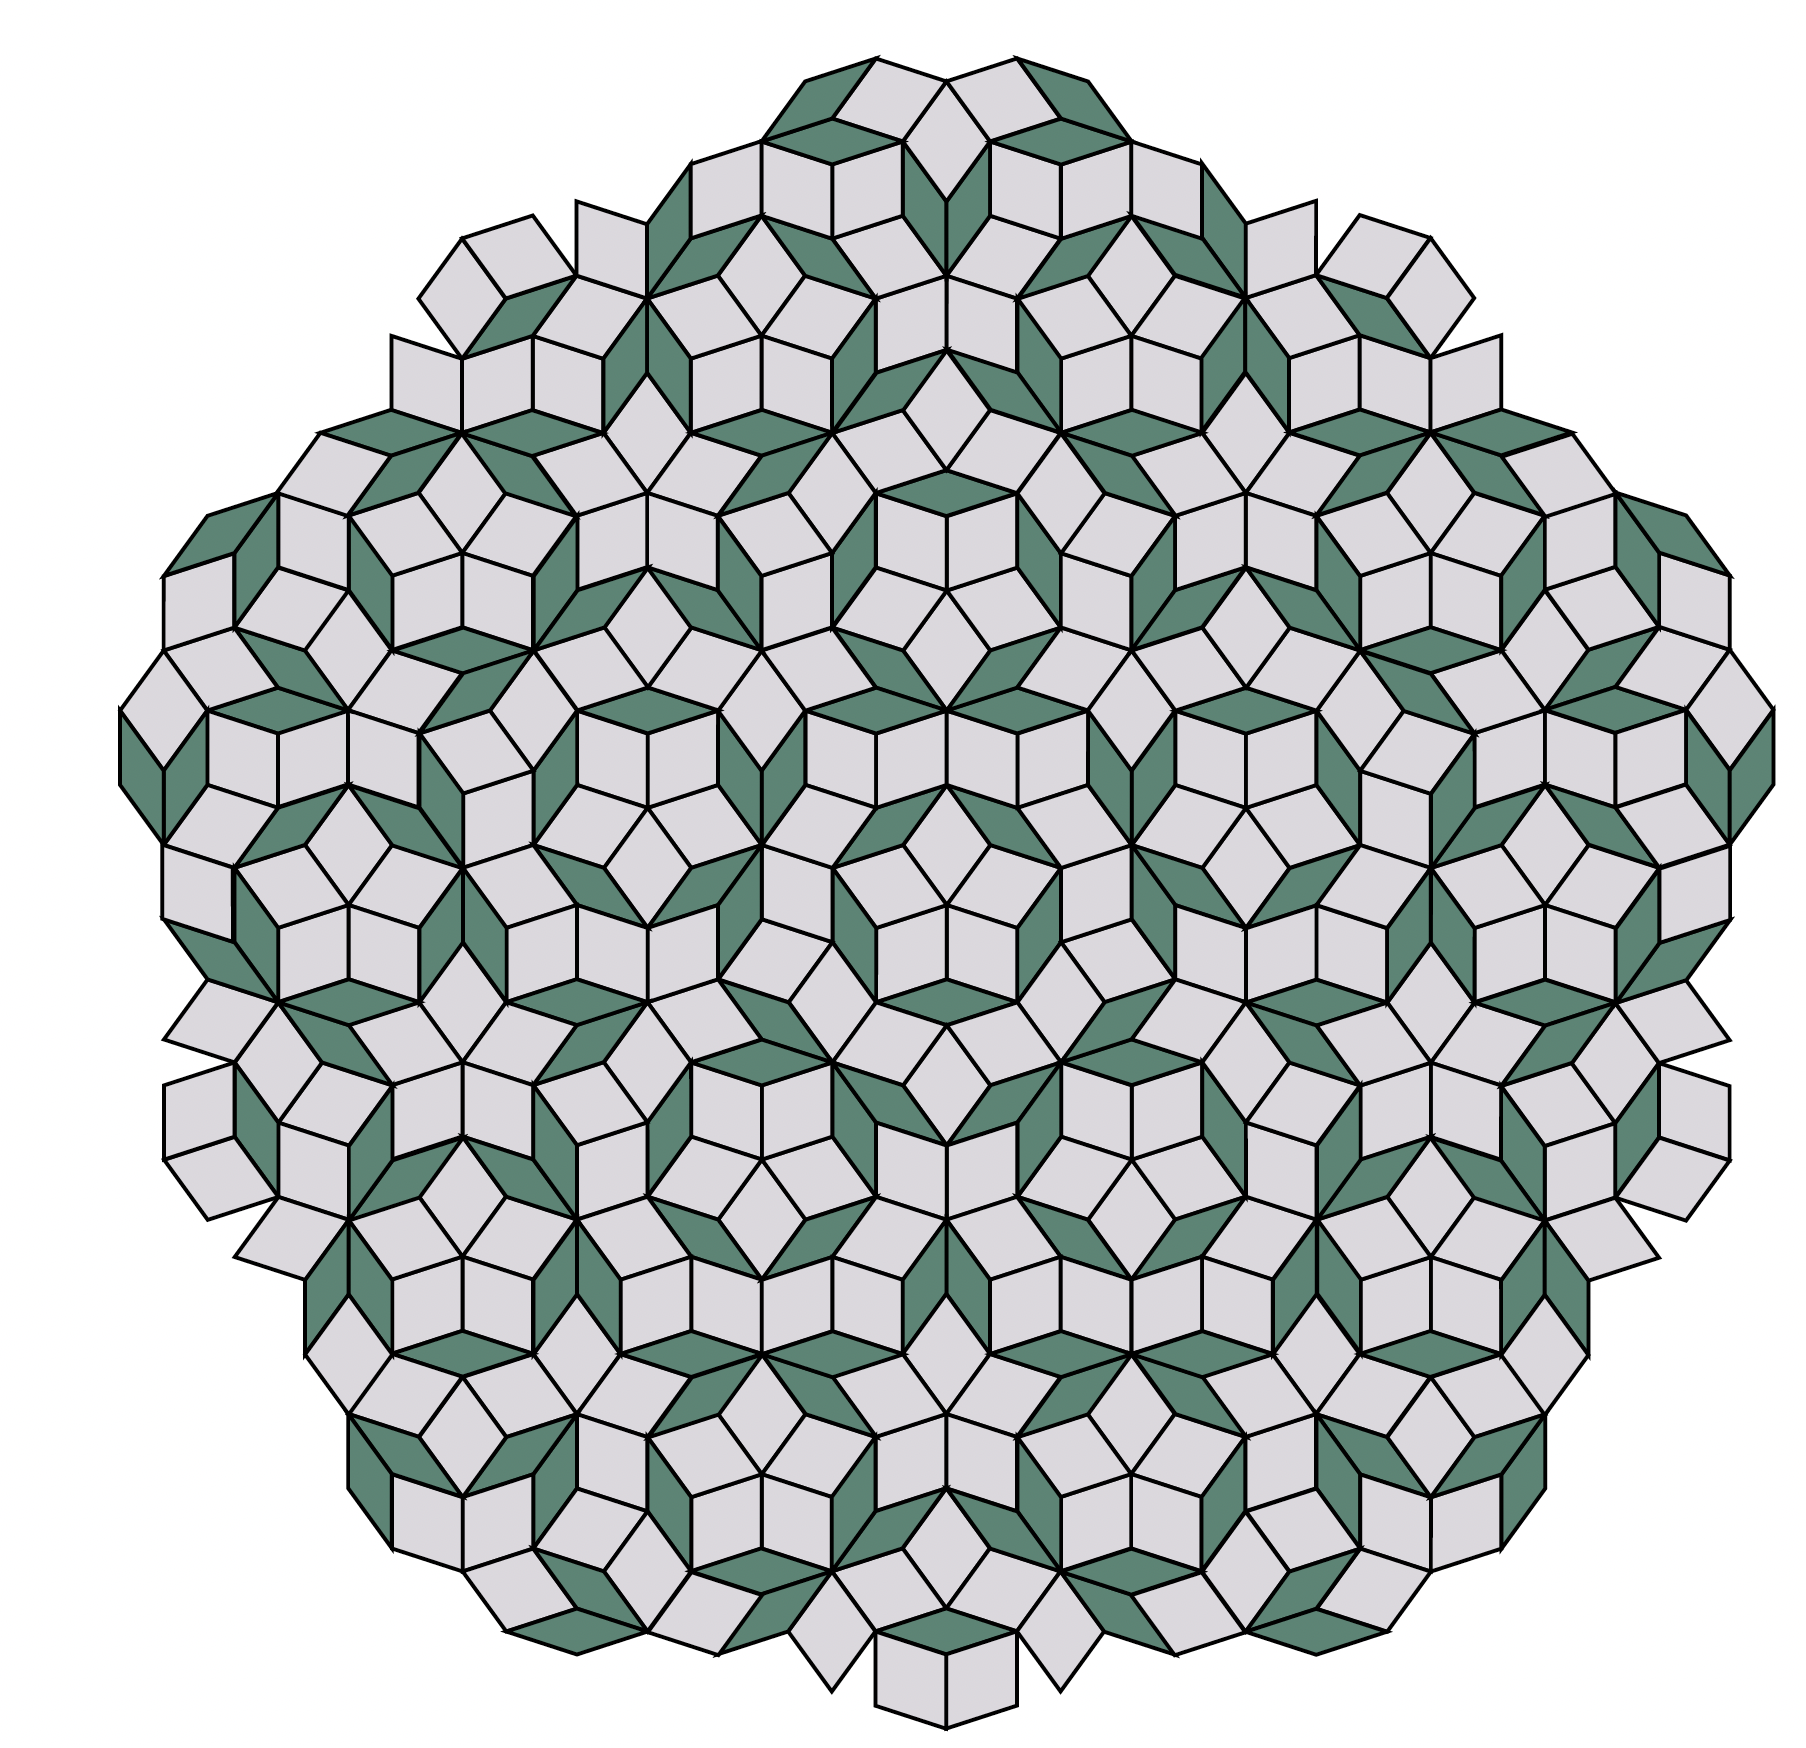 The Penrose tiling pattern, composed of two shapes, has an ordered (quasiperiodic order) yet never-repeating structure.